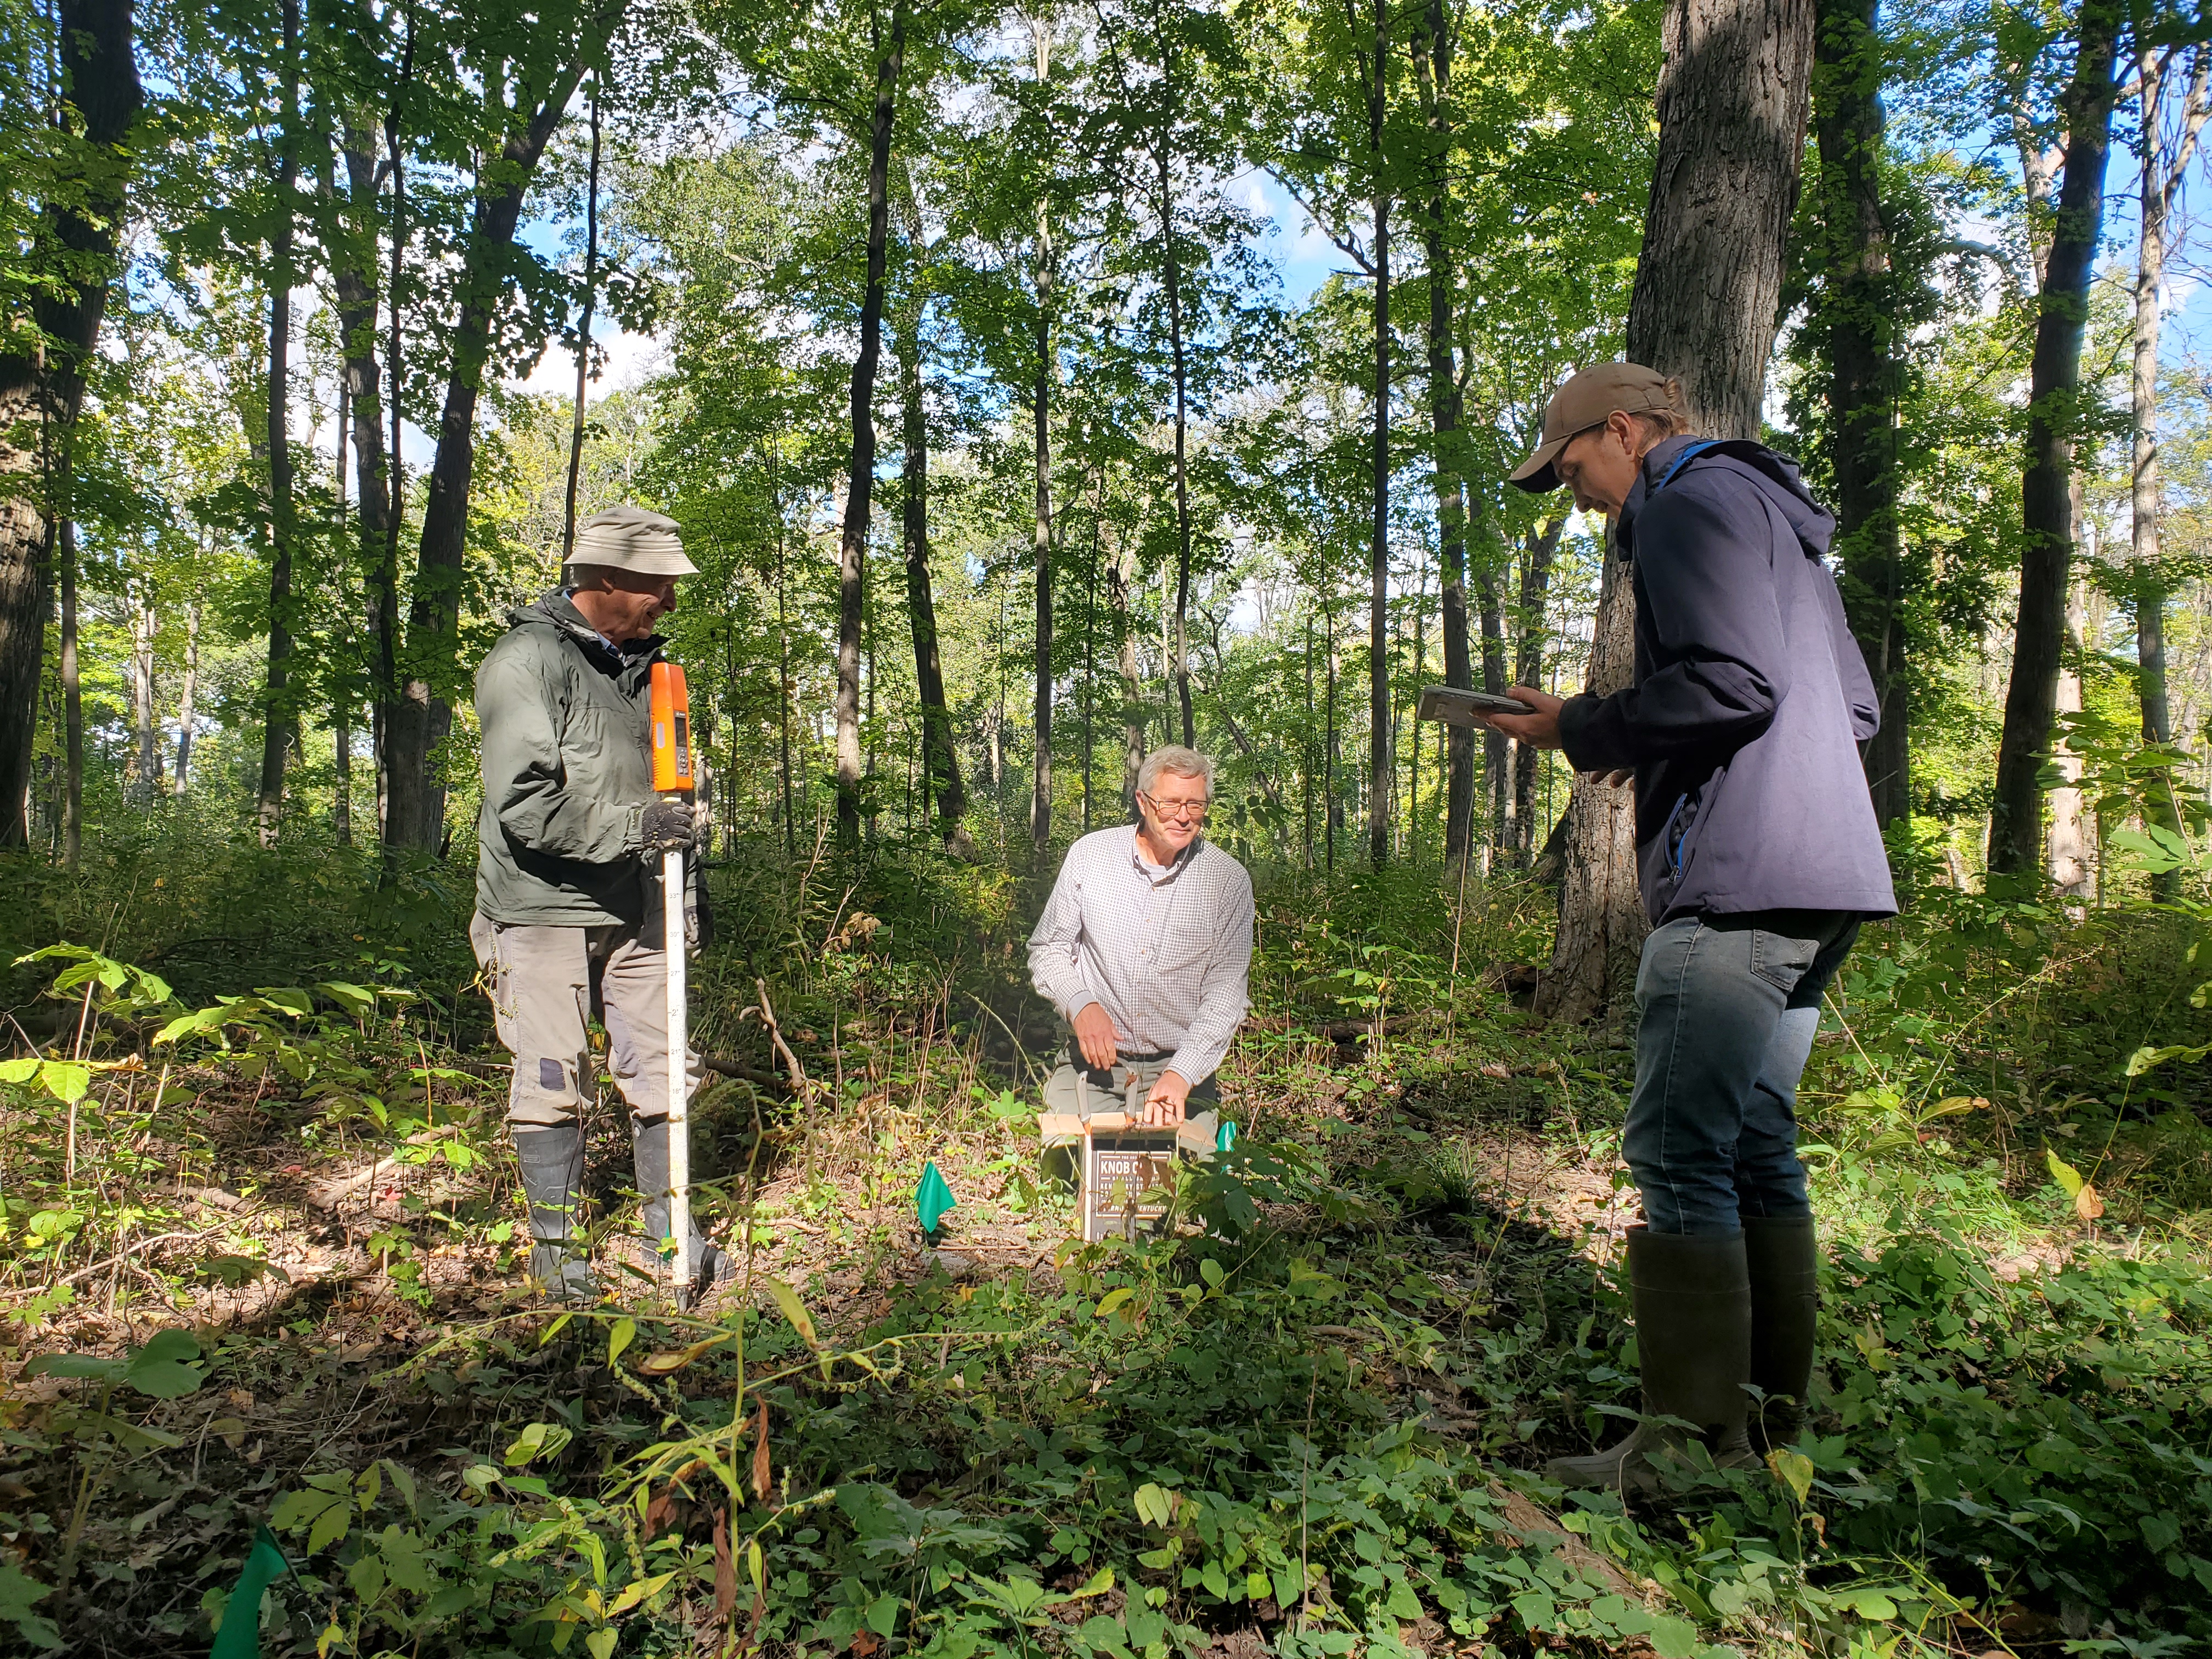 Photo of three people in an open deciduous forest, sunlight peaking through the canopy. People are holding monitoring equipment, centered around a population of plants.